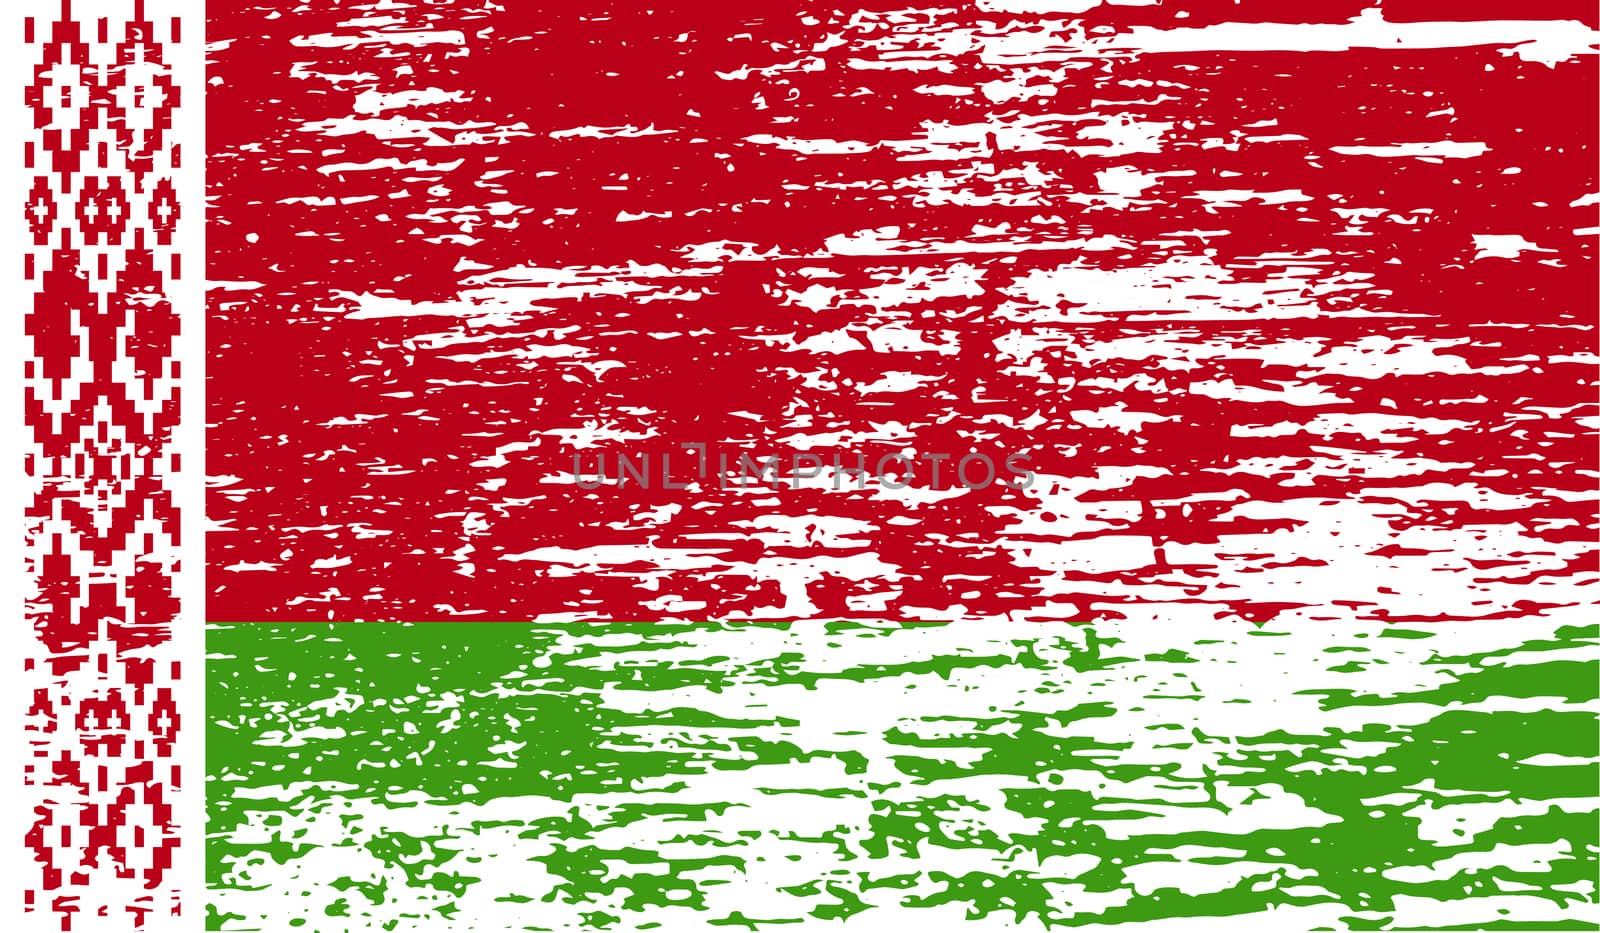 Flag of Belarus with old texture.  illustration